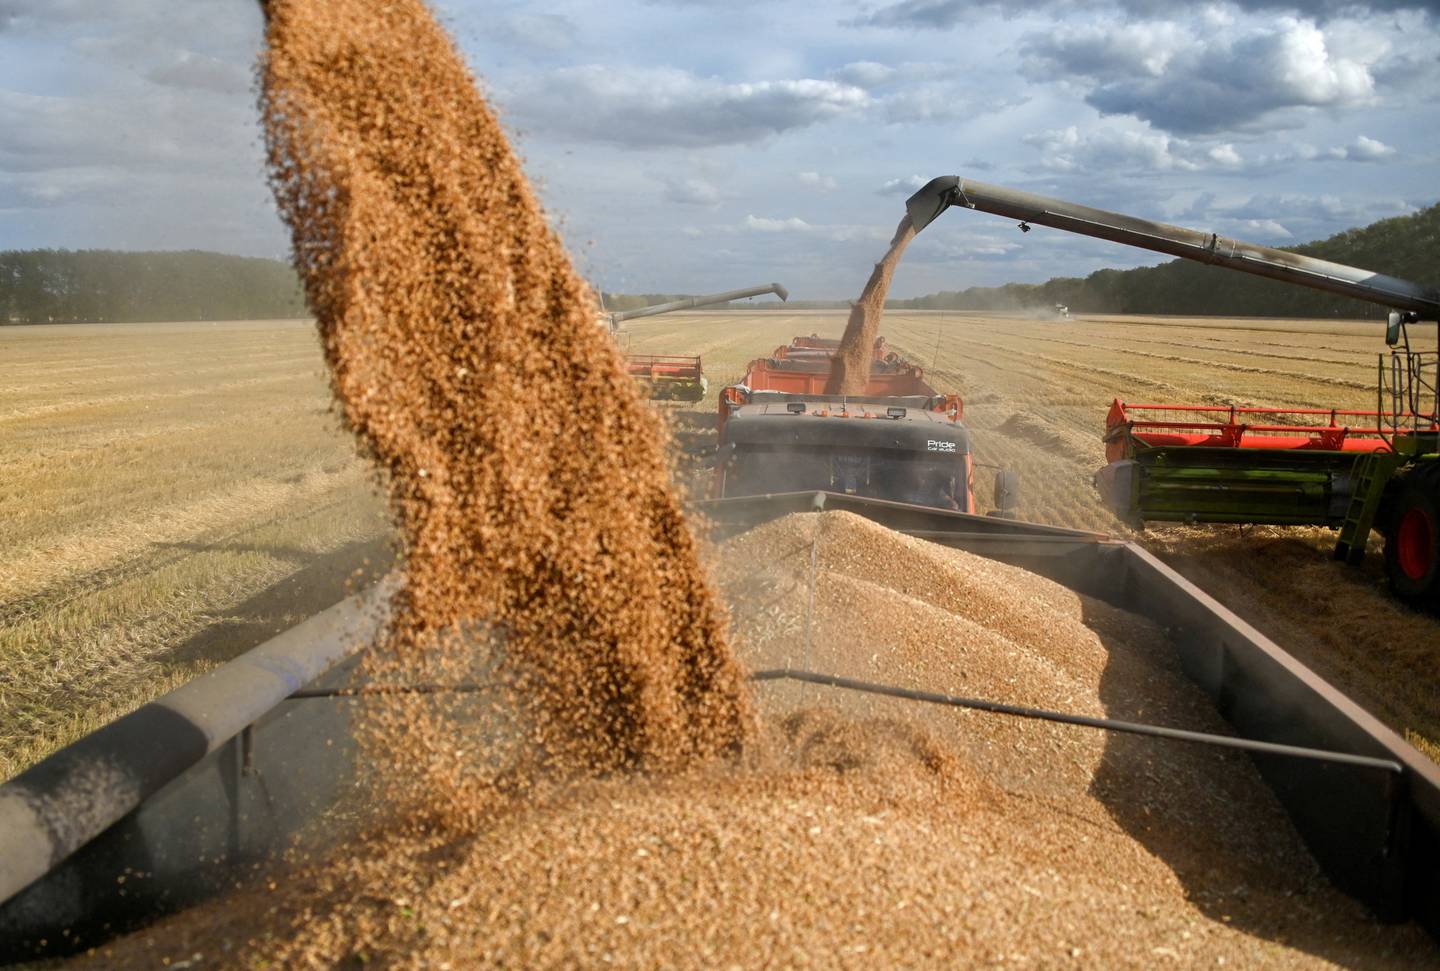 Wheat loaded onto trucks during harvest near a village in the Omsk region, Russia, on September 8. Reuters